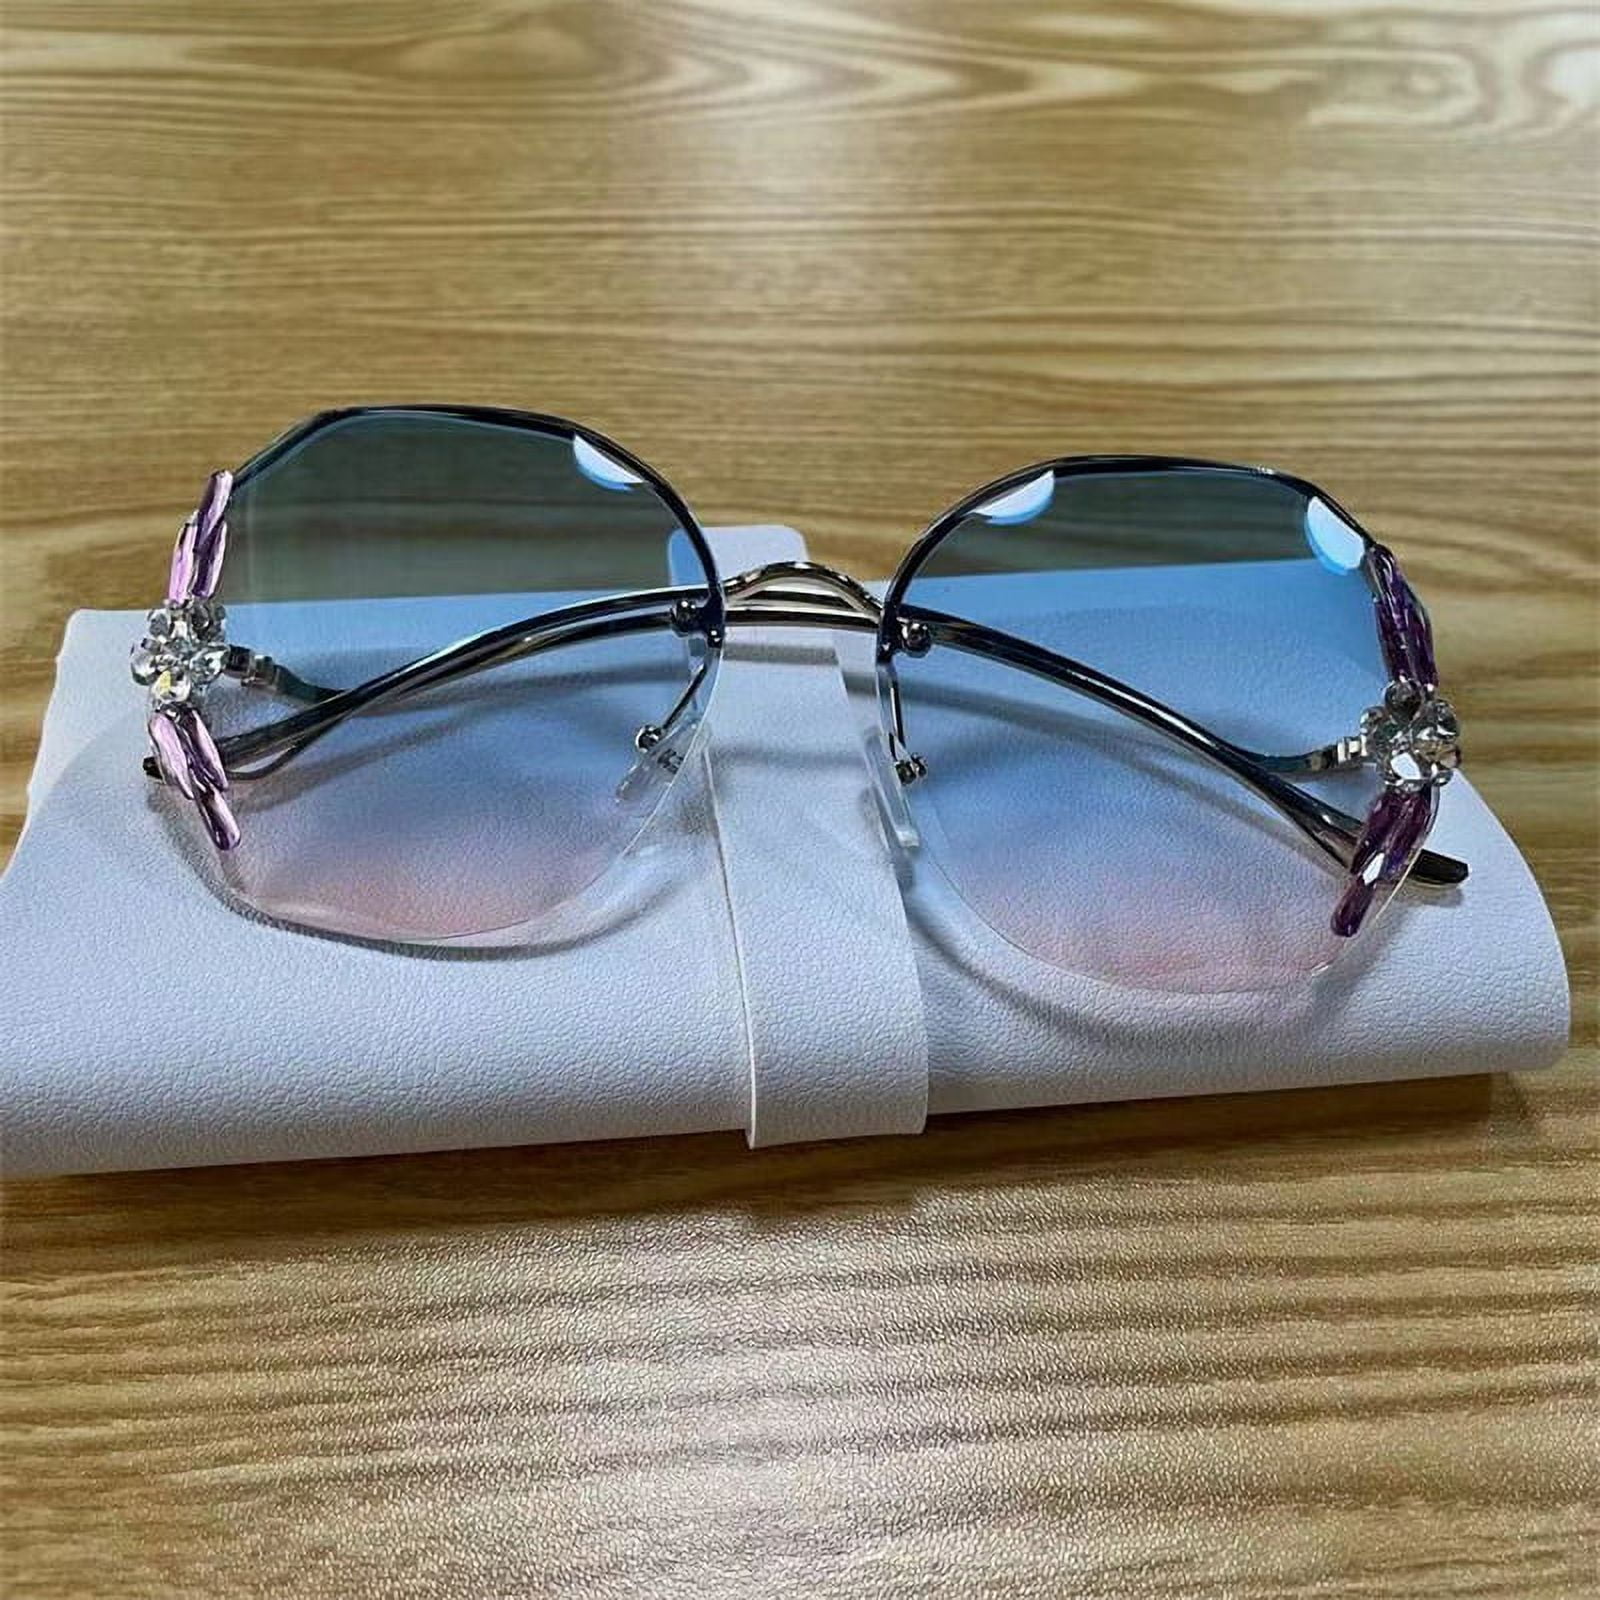 New Rimless Clear Sunglasses Butterfly Oversized Metal Glasses Vintage Designer Brand Luxury Women Celebrity Big Sunglasses, Pink Yellow